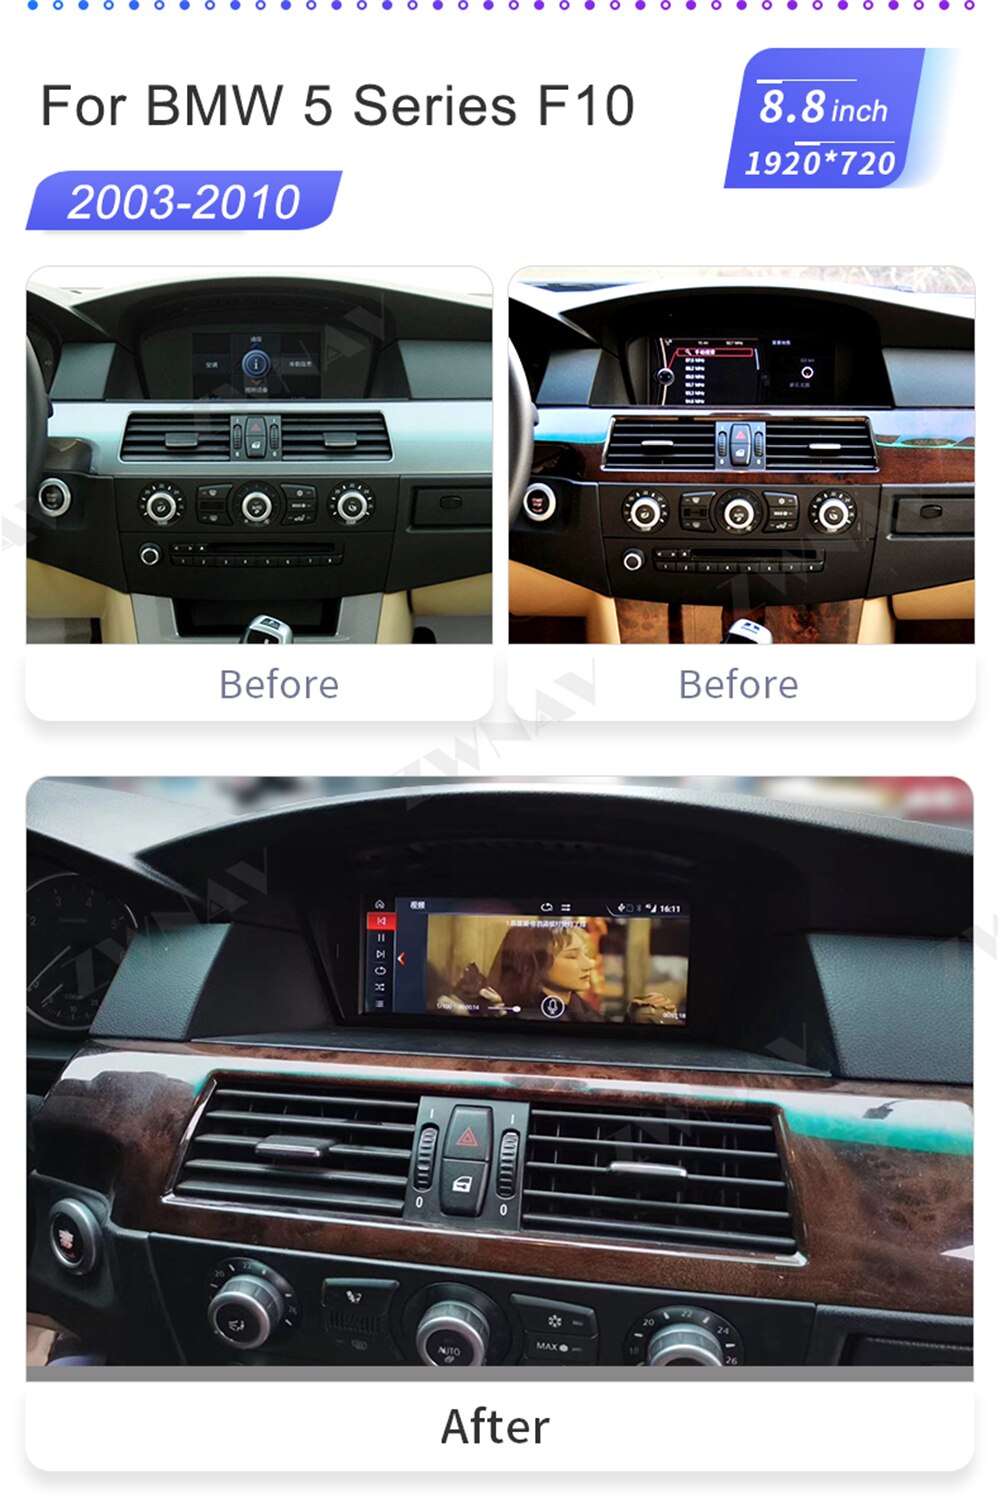 128G 12.3" Carplay Android 10 Screen For BMW 5 Series F10 F11 2011 2012 2013 2014 2015 2016 GPS Radio Receiver Audio Stereo Unit